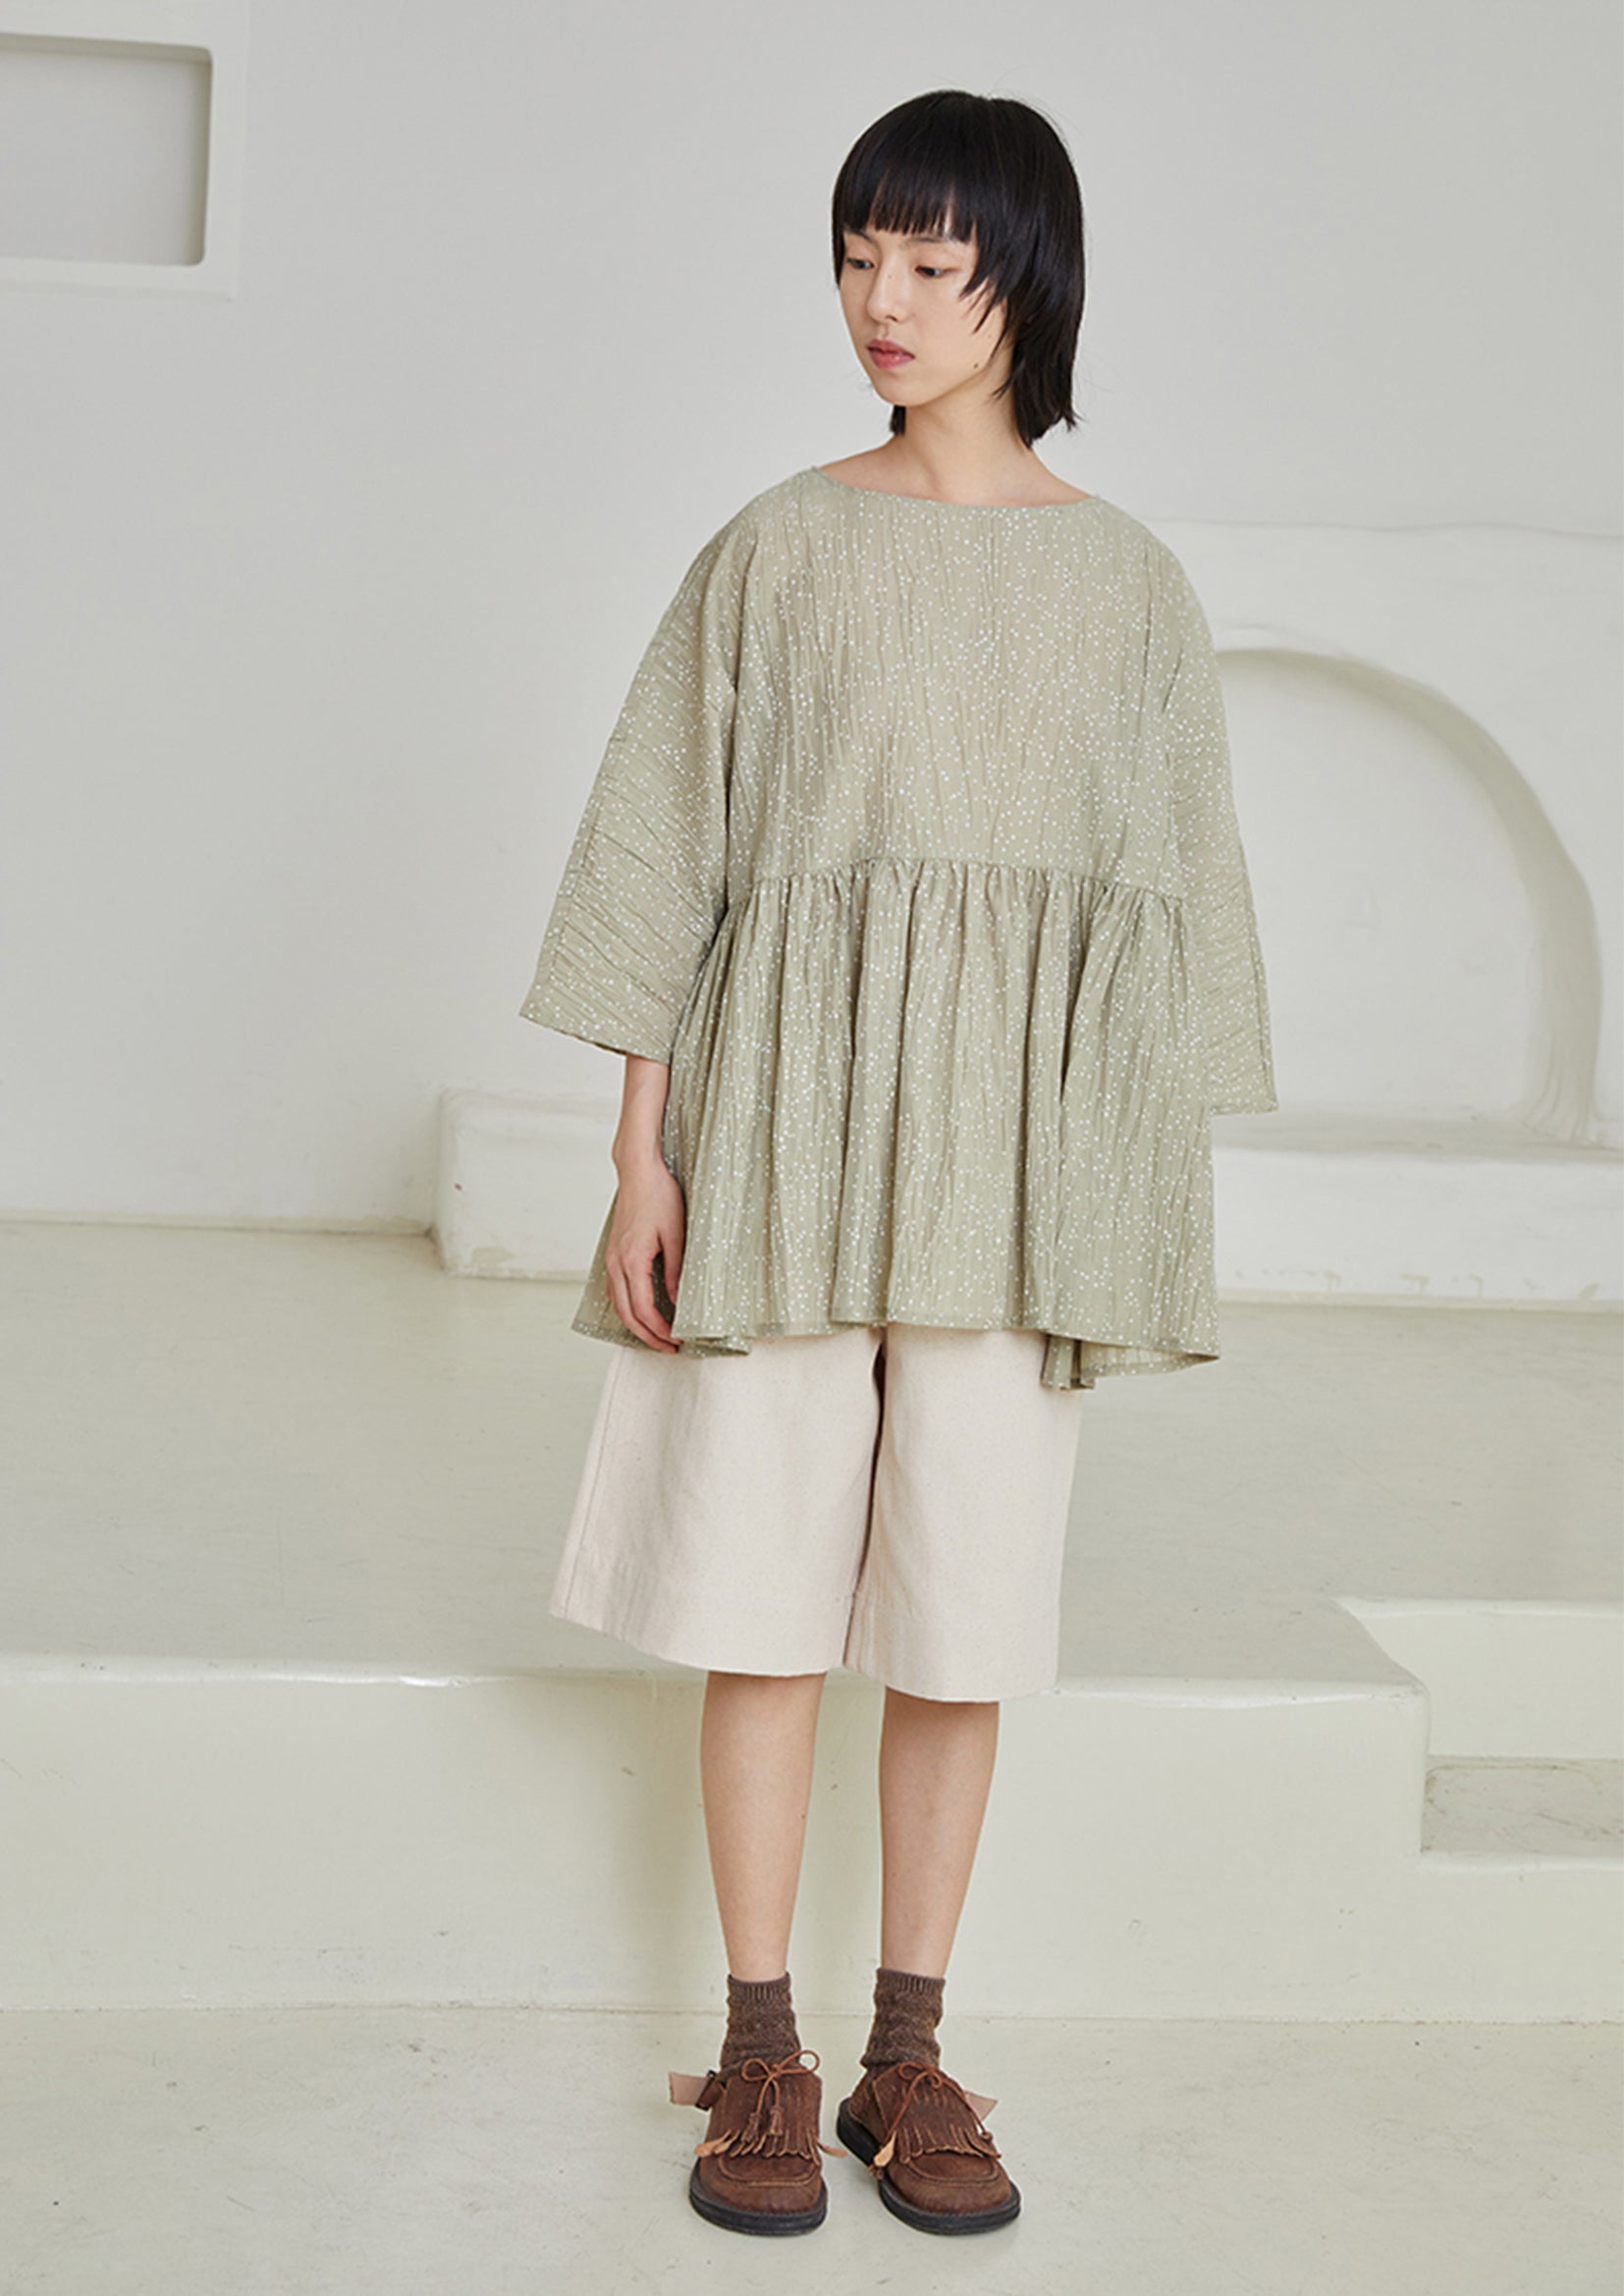 Dot textured loose smock top in pale green